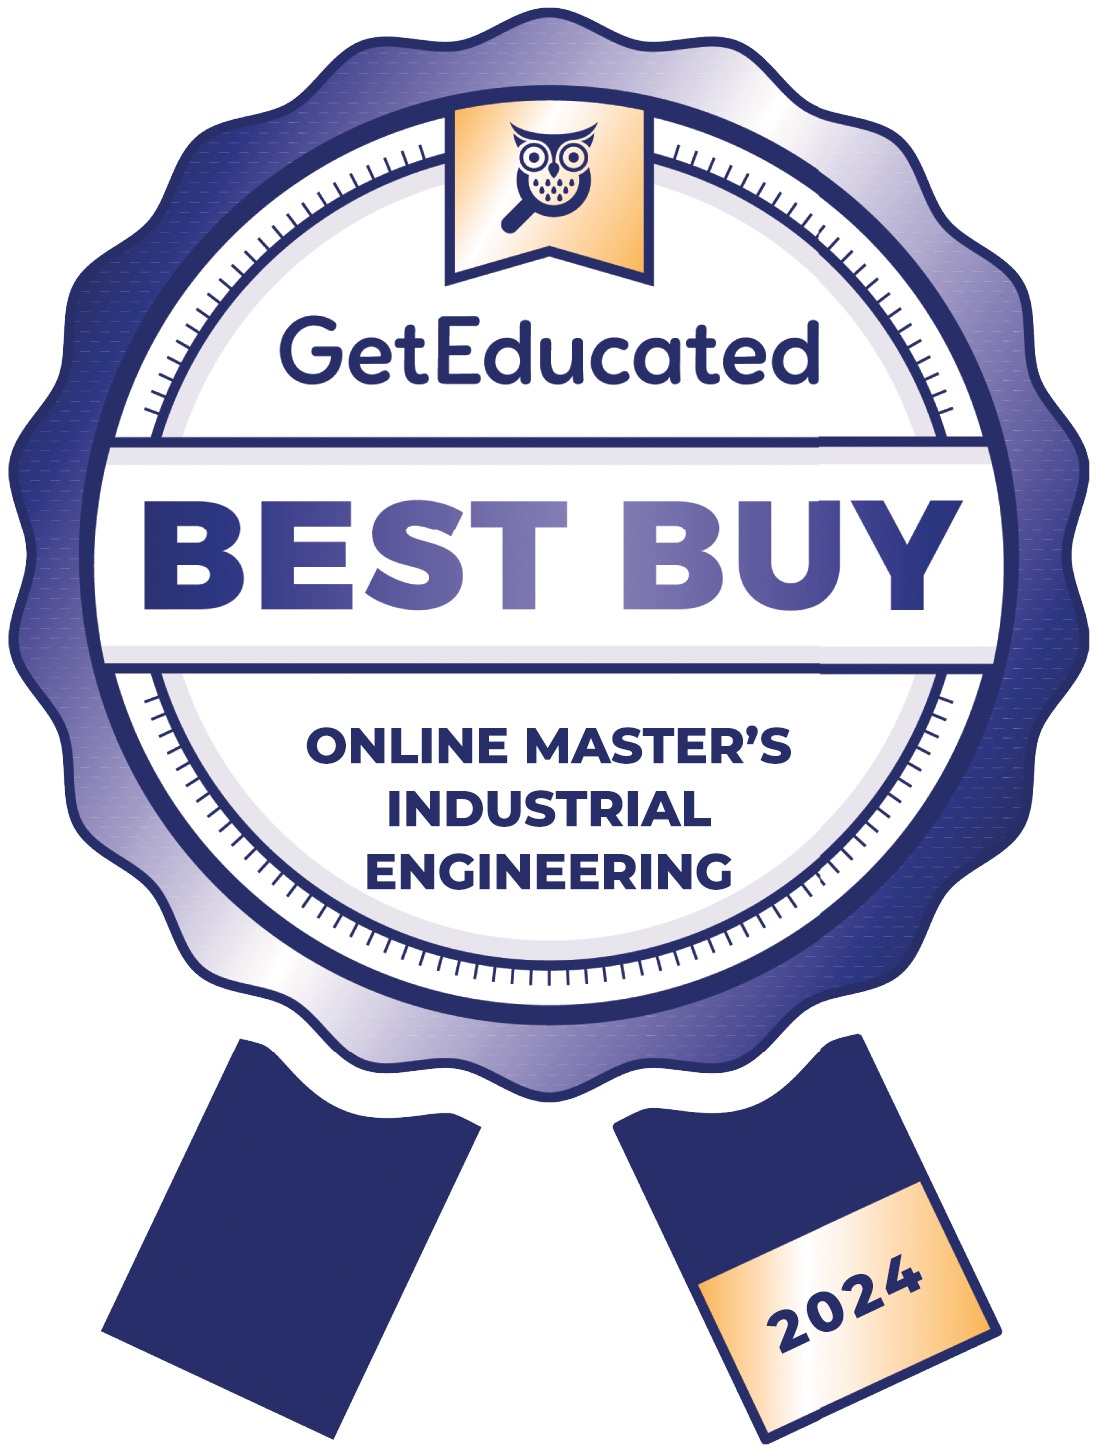 Rankings of the cheapest online master's industrial engineering degrees